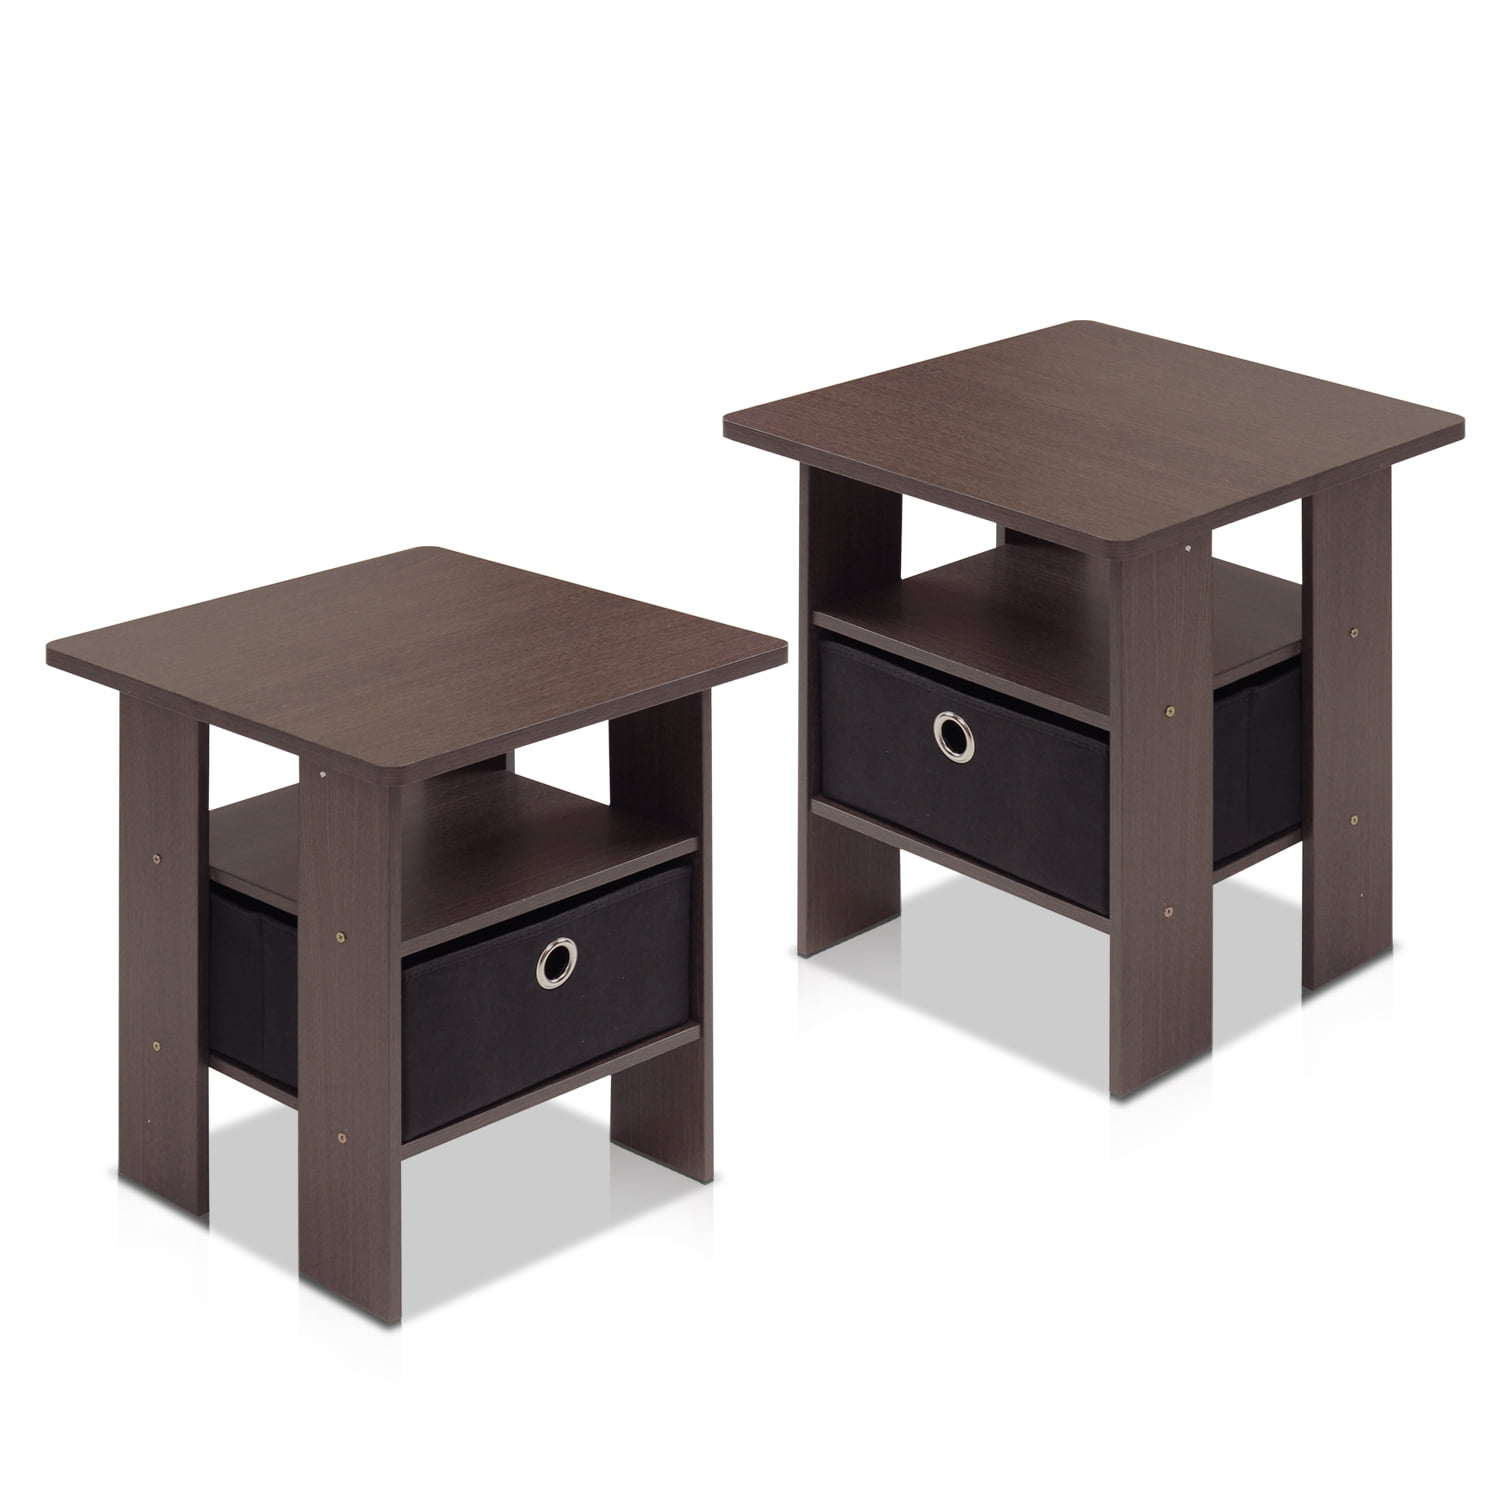 Furinno End Table Bedroom Night Stand W/bin Drawer Espresso/brown for sale online 